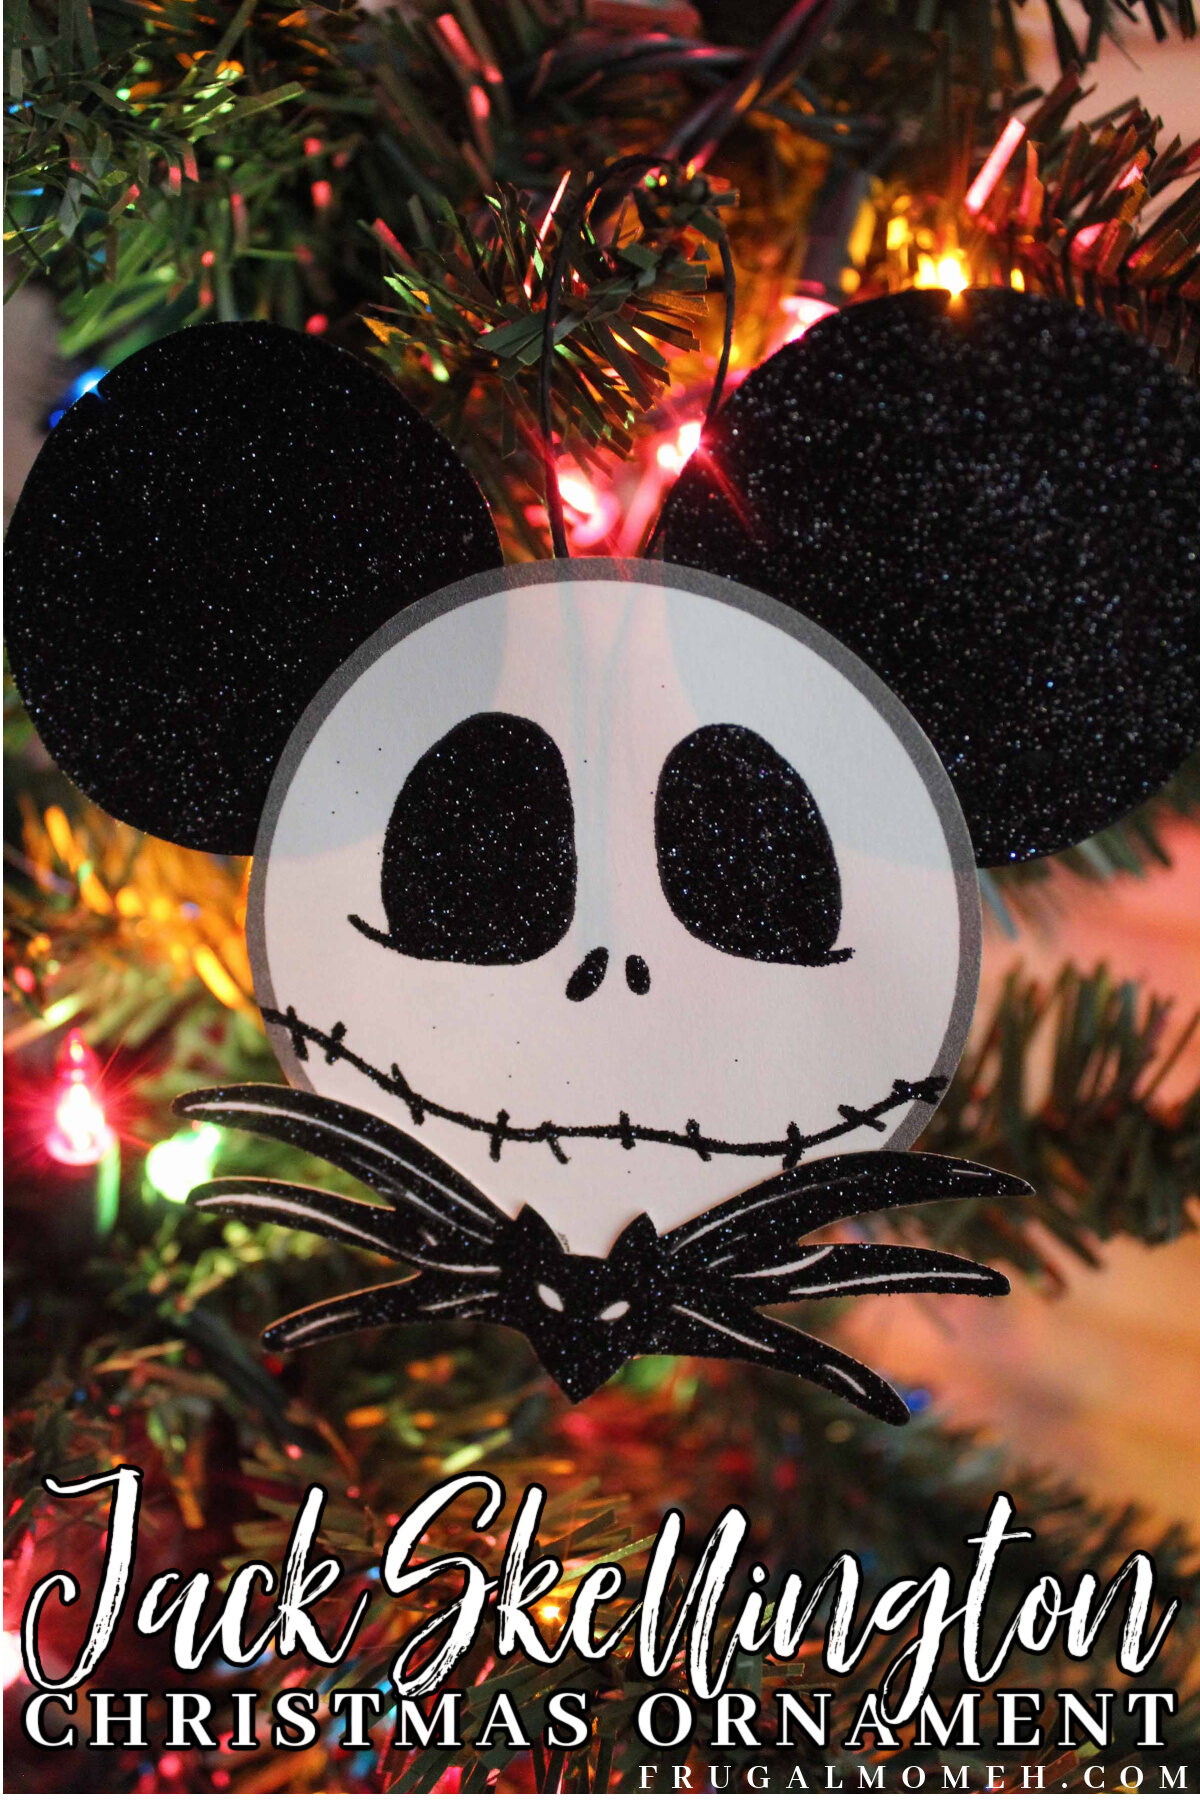 This DIY Nightmare before Christmas themed Mickey ear ornament featuring Jack Skellington is easy to make with the free printable template!